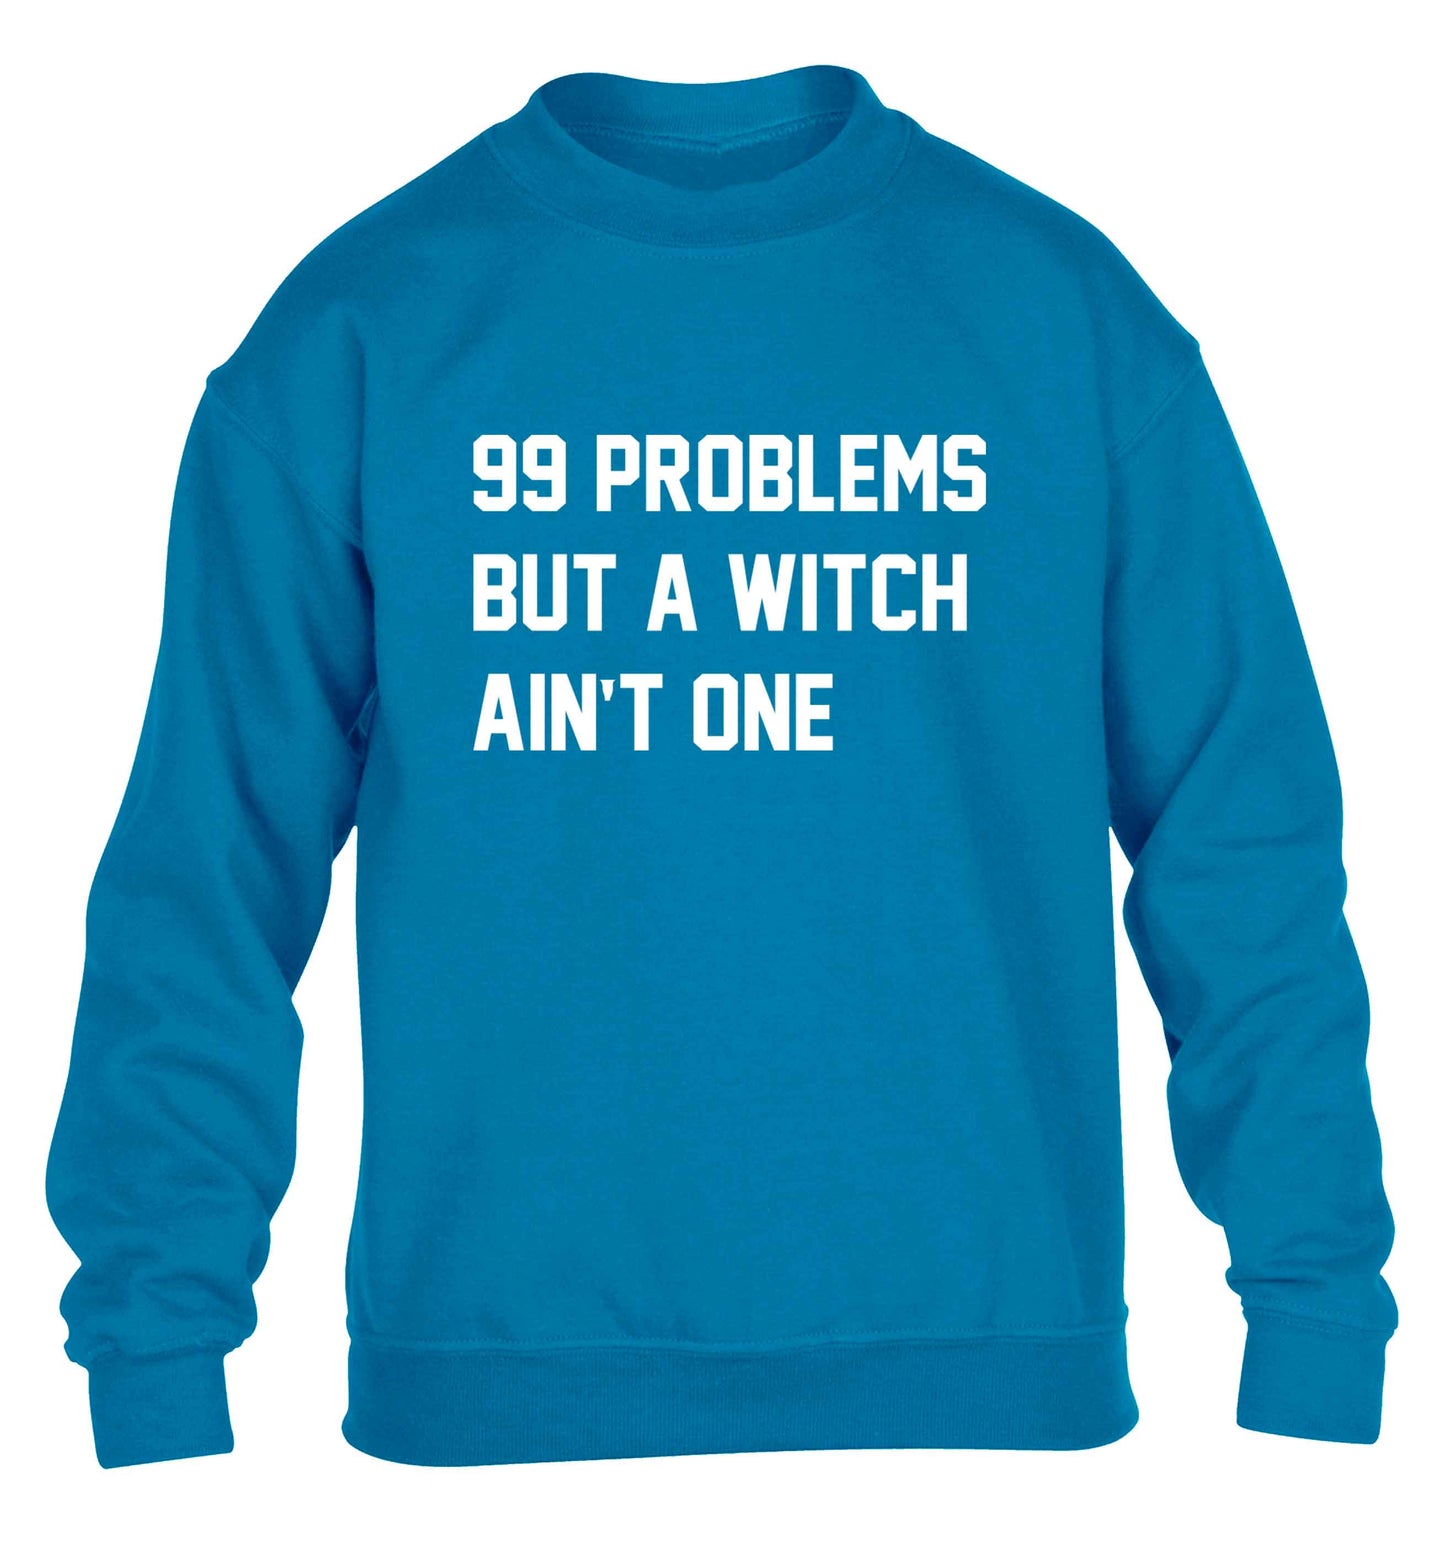 99 Problems but a witch aint one children's blue sweater 12-13 Years